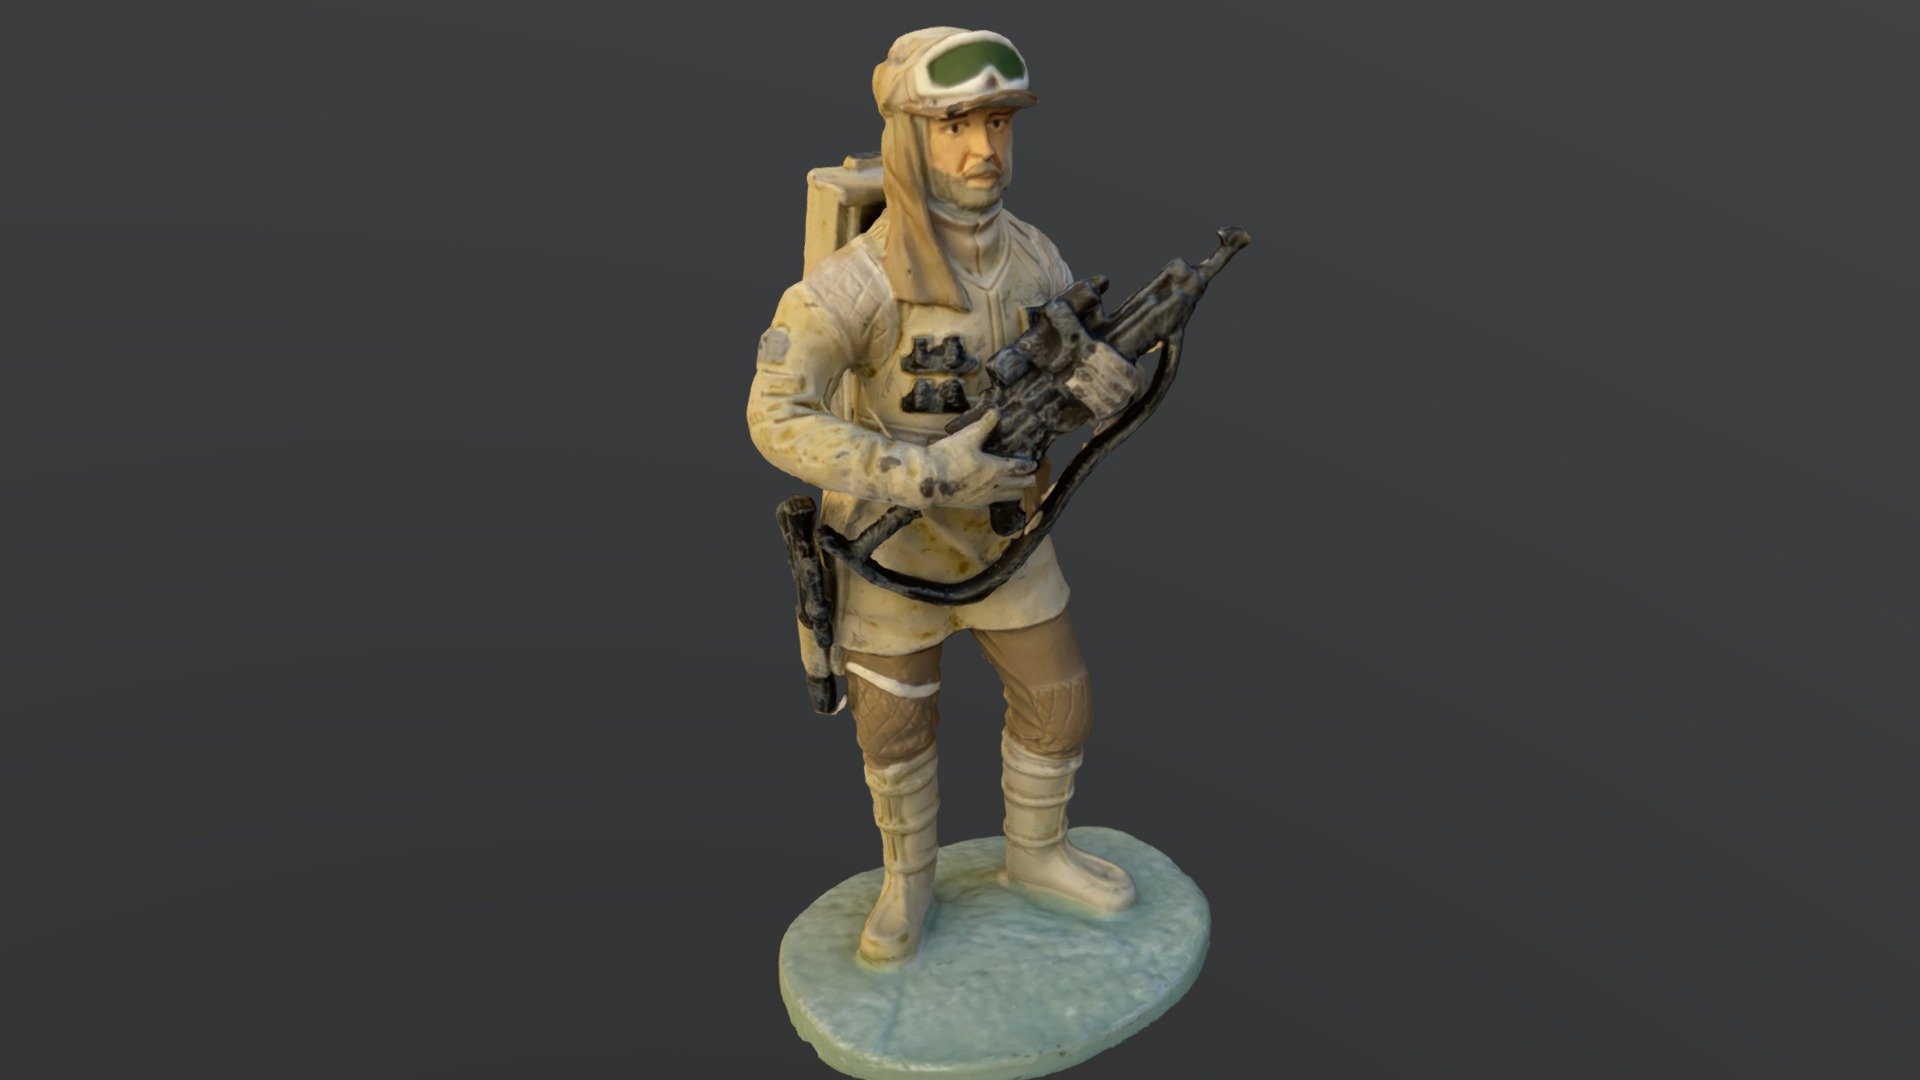 A miniature lead statue of Cold-Weather Soldier, a character from the Star Wars franchise, captured with RealityScan photogrammetry software 3d model